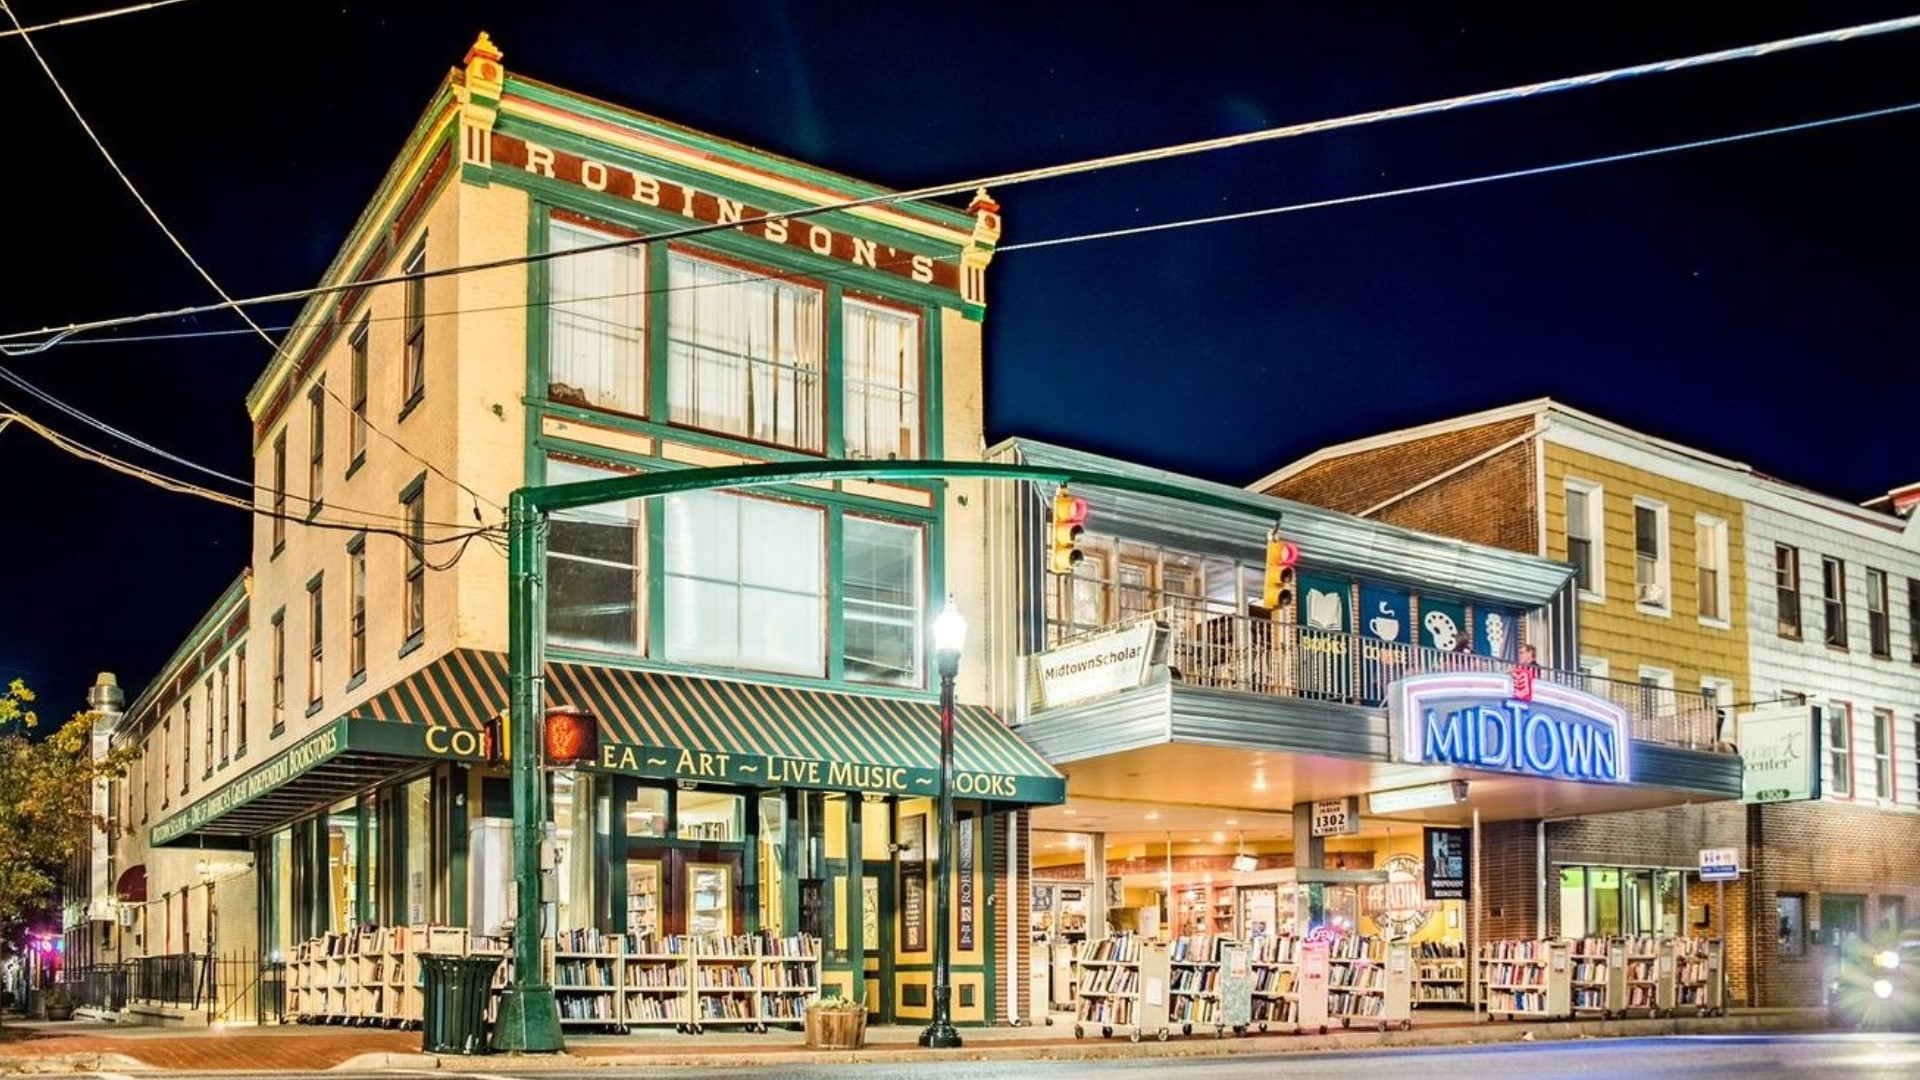 The local bookstore beat out four other finalists, all of which were nominated for the “positive roles they continue to play in their communities."